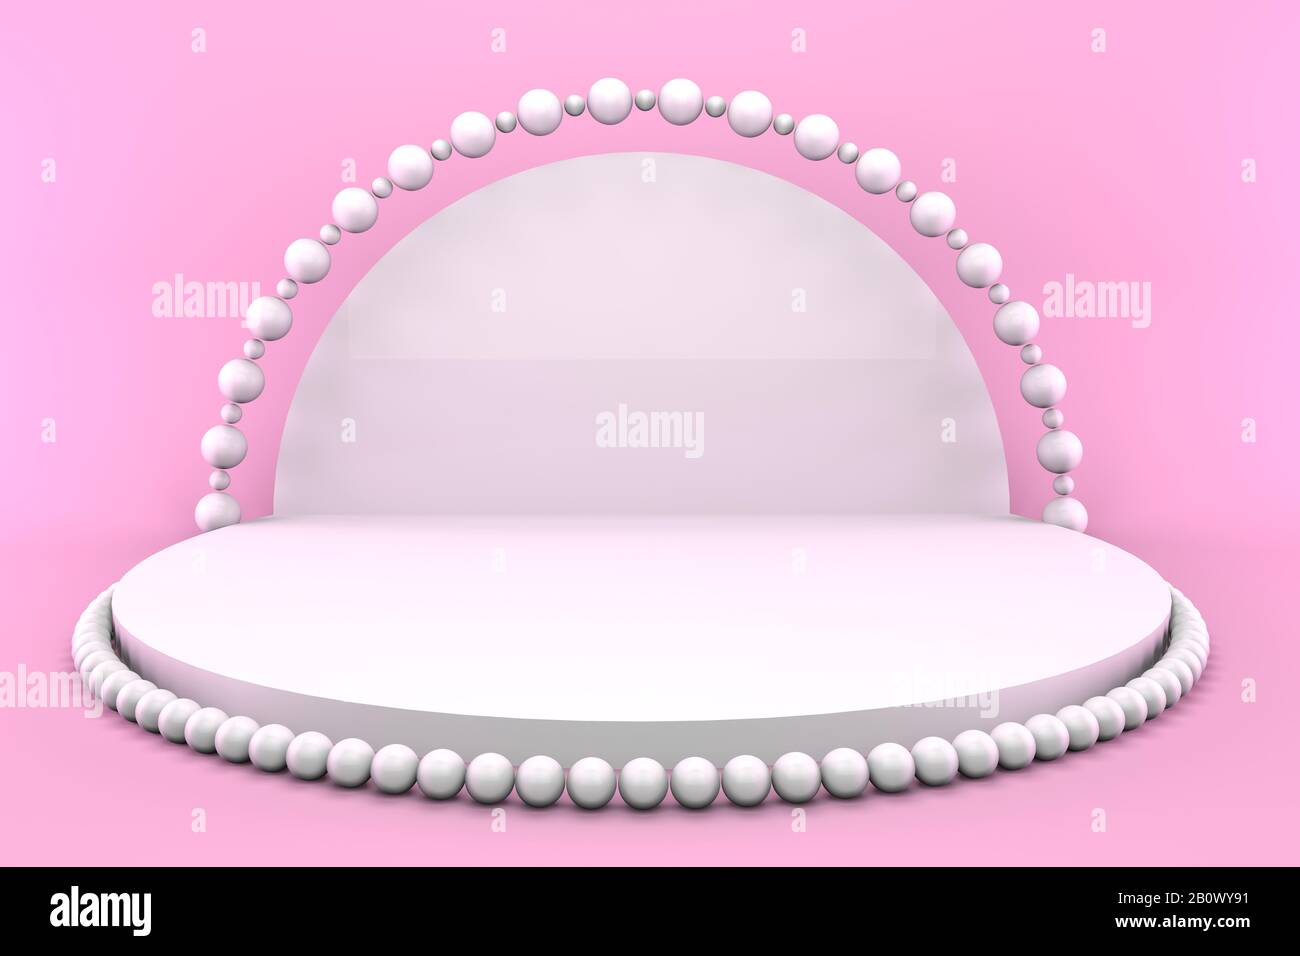 3d render round pedestal with pearls on a pink background. Minimalistic podium concept for goods. Stock Photo